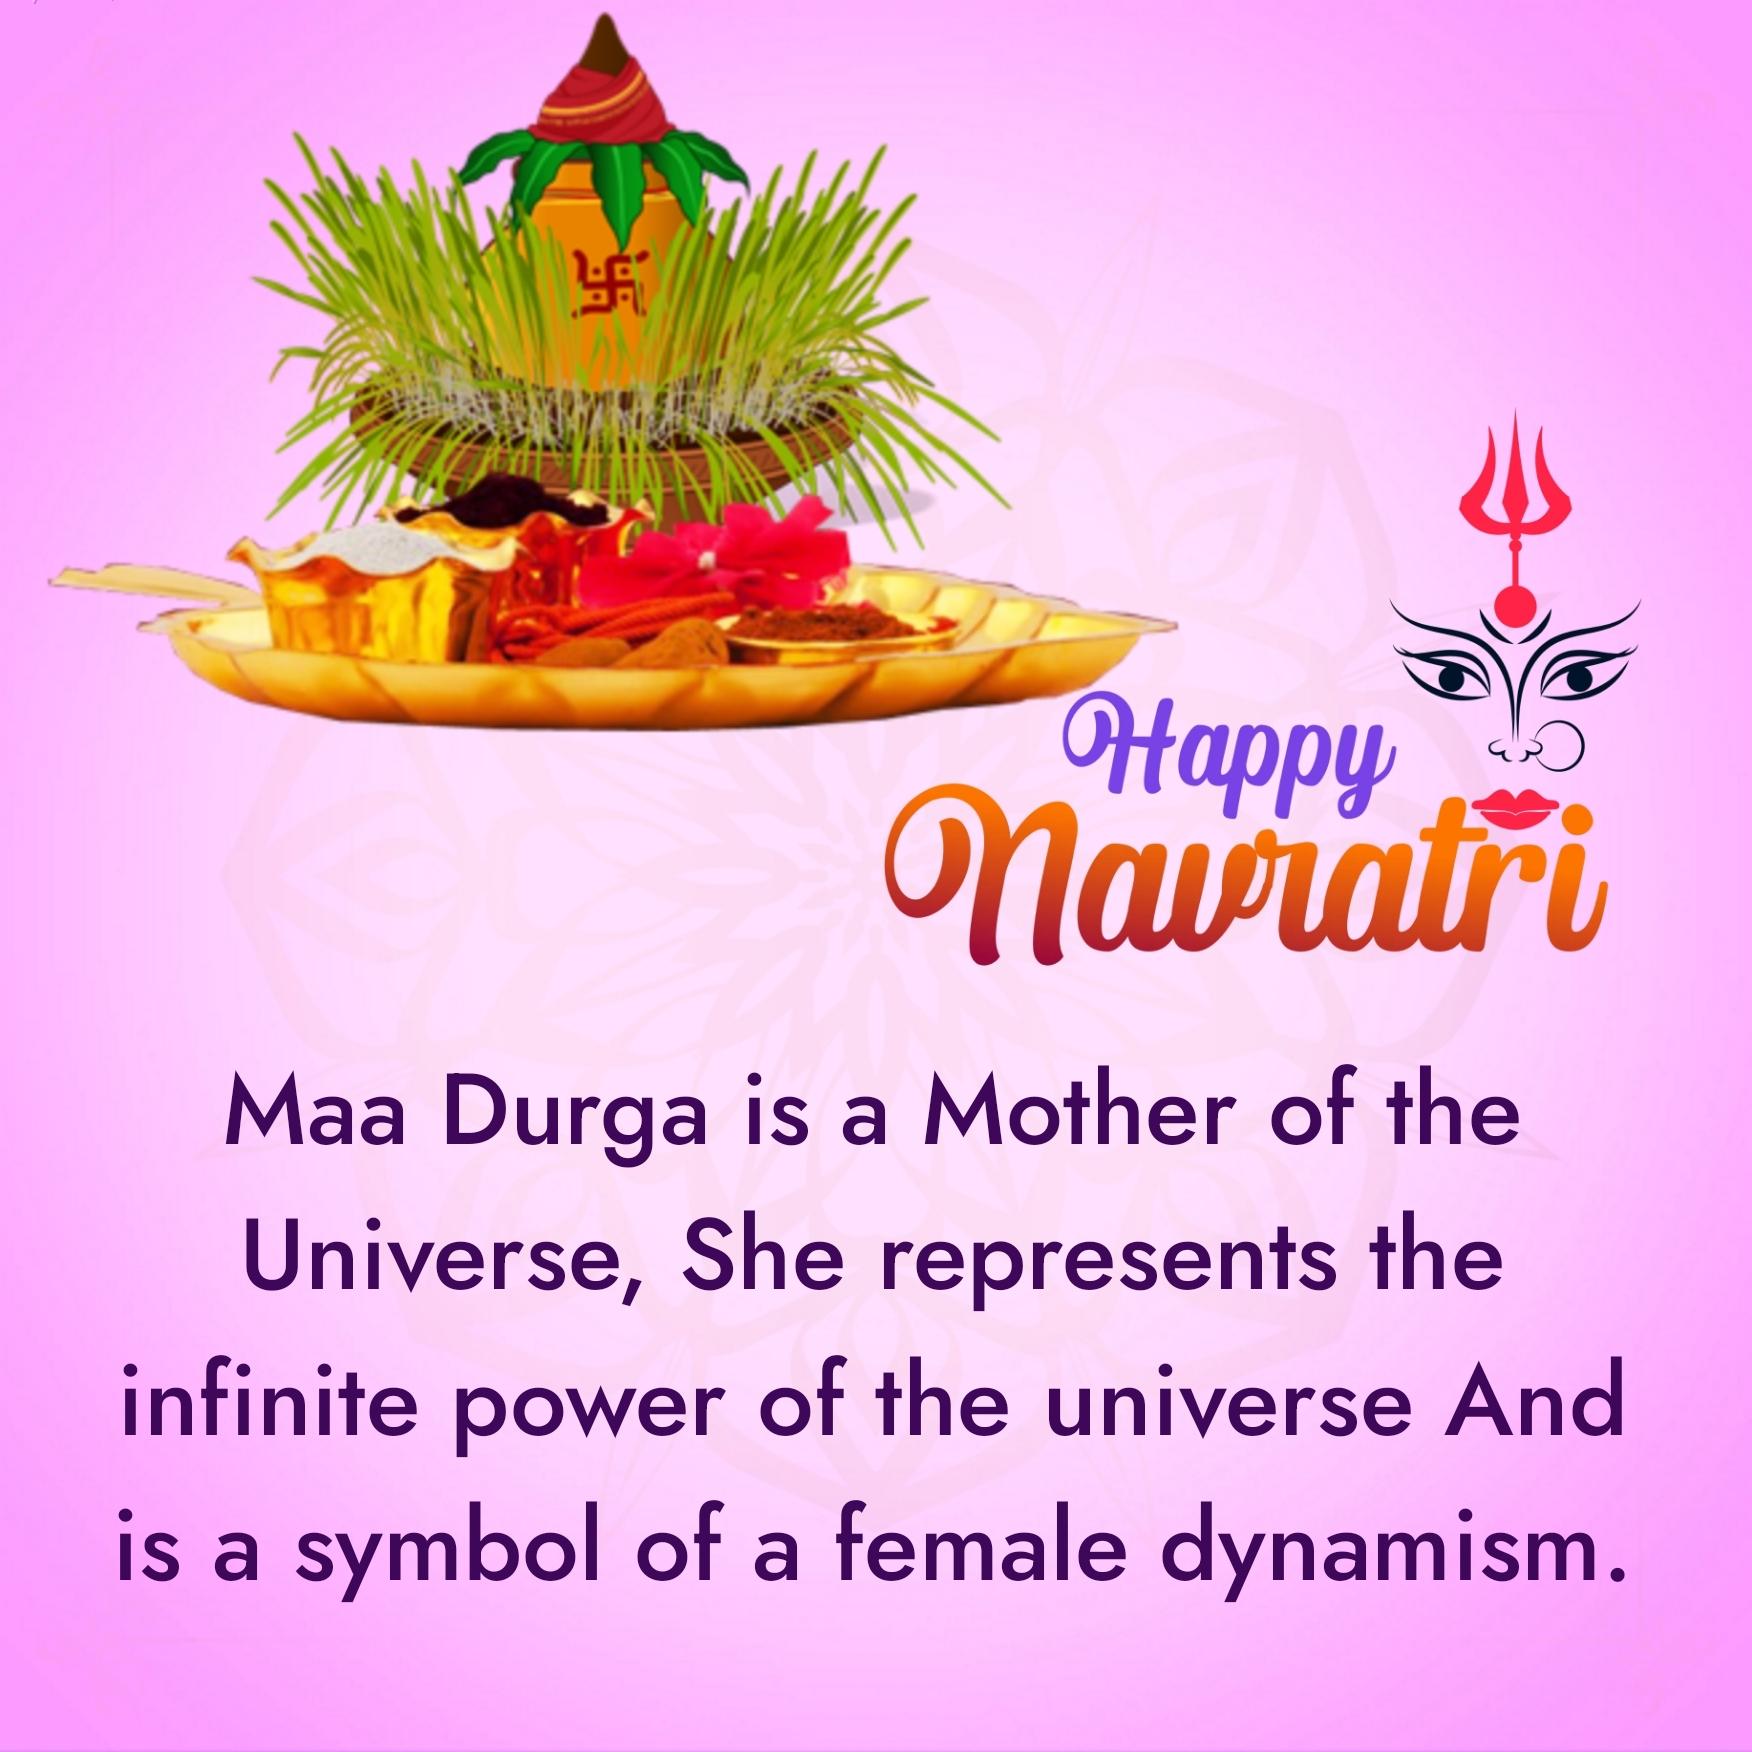 Maa Durga is a Mother of the Universe